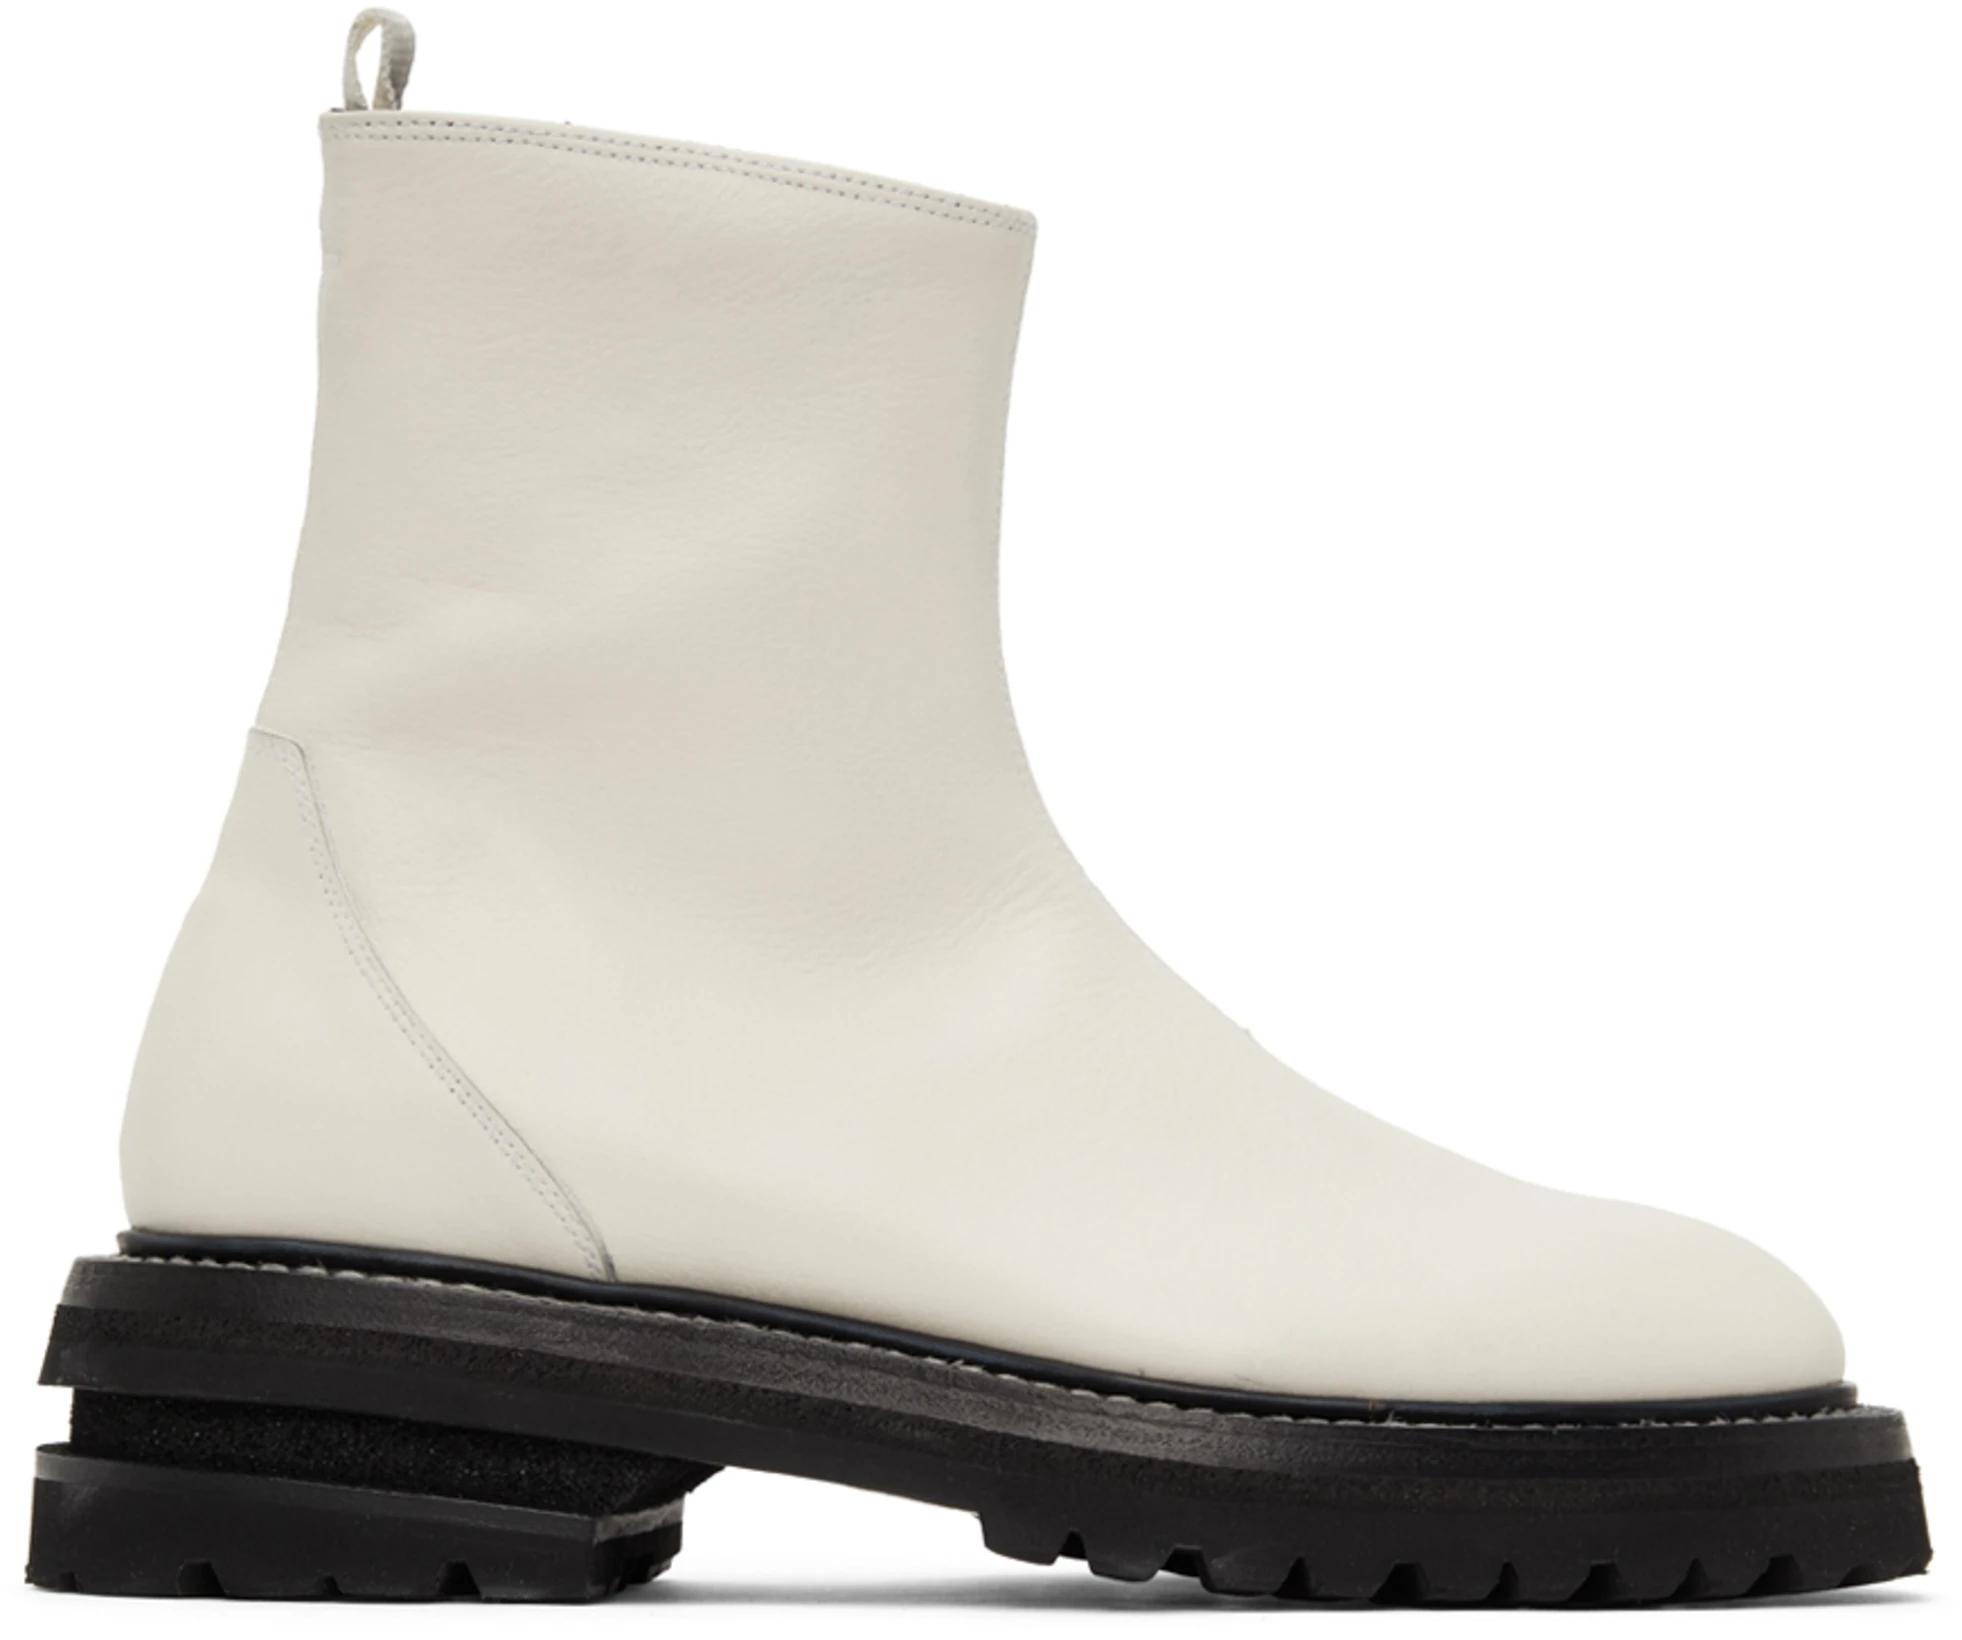 SSENSE Exclusive White Zip-Up Boots by ADYAR